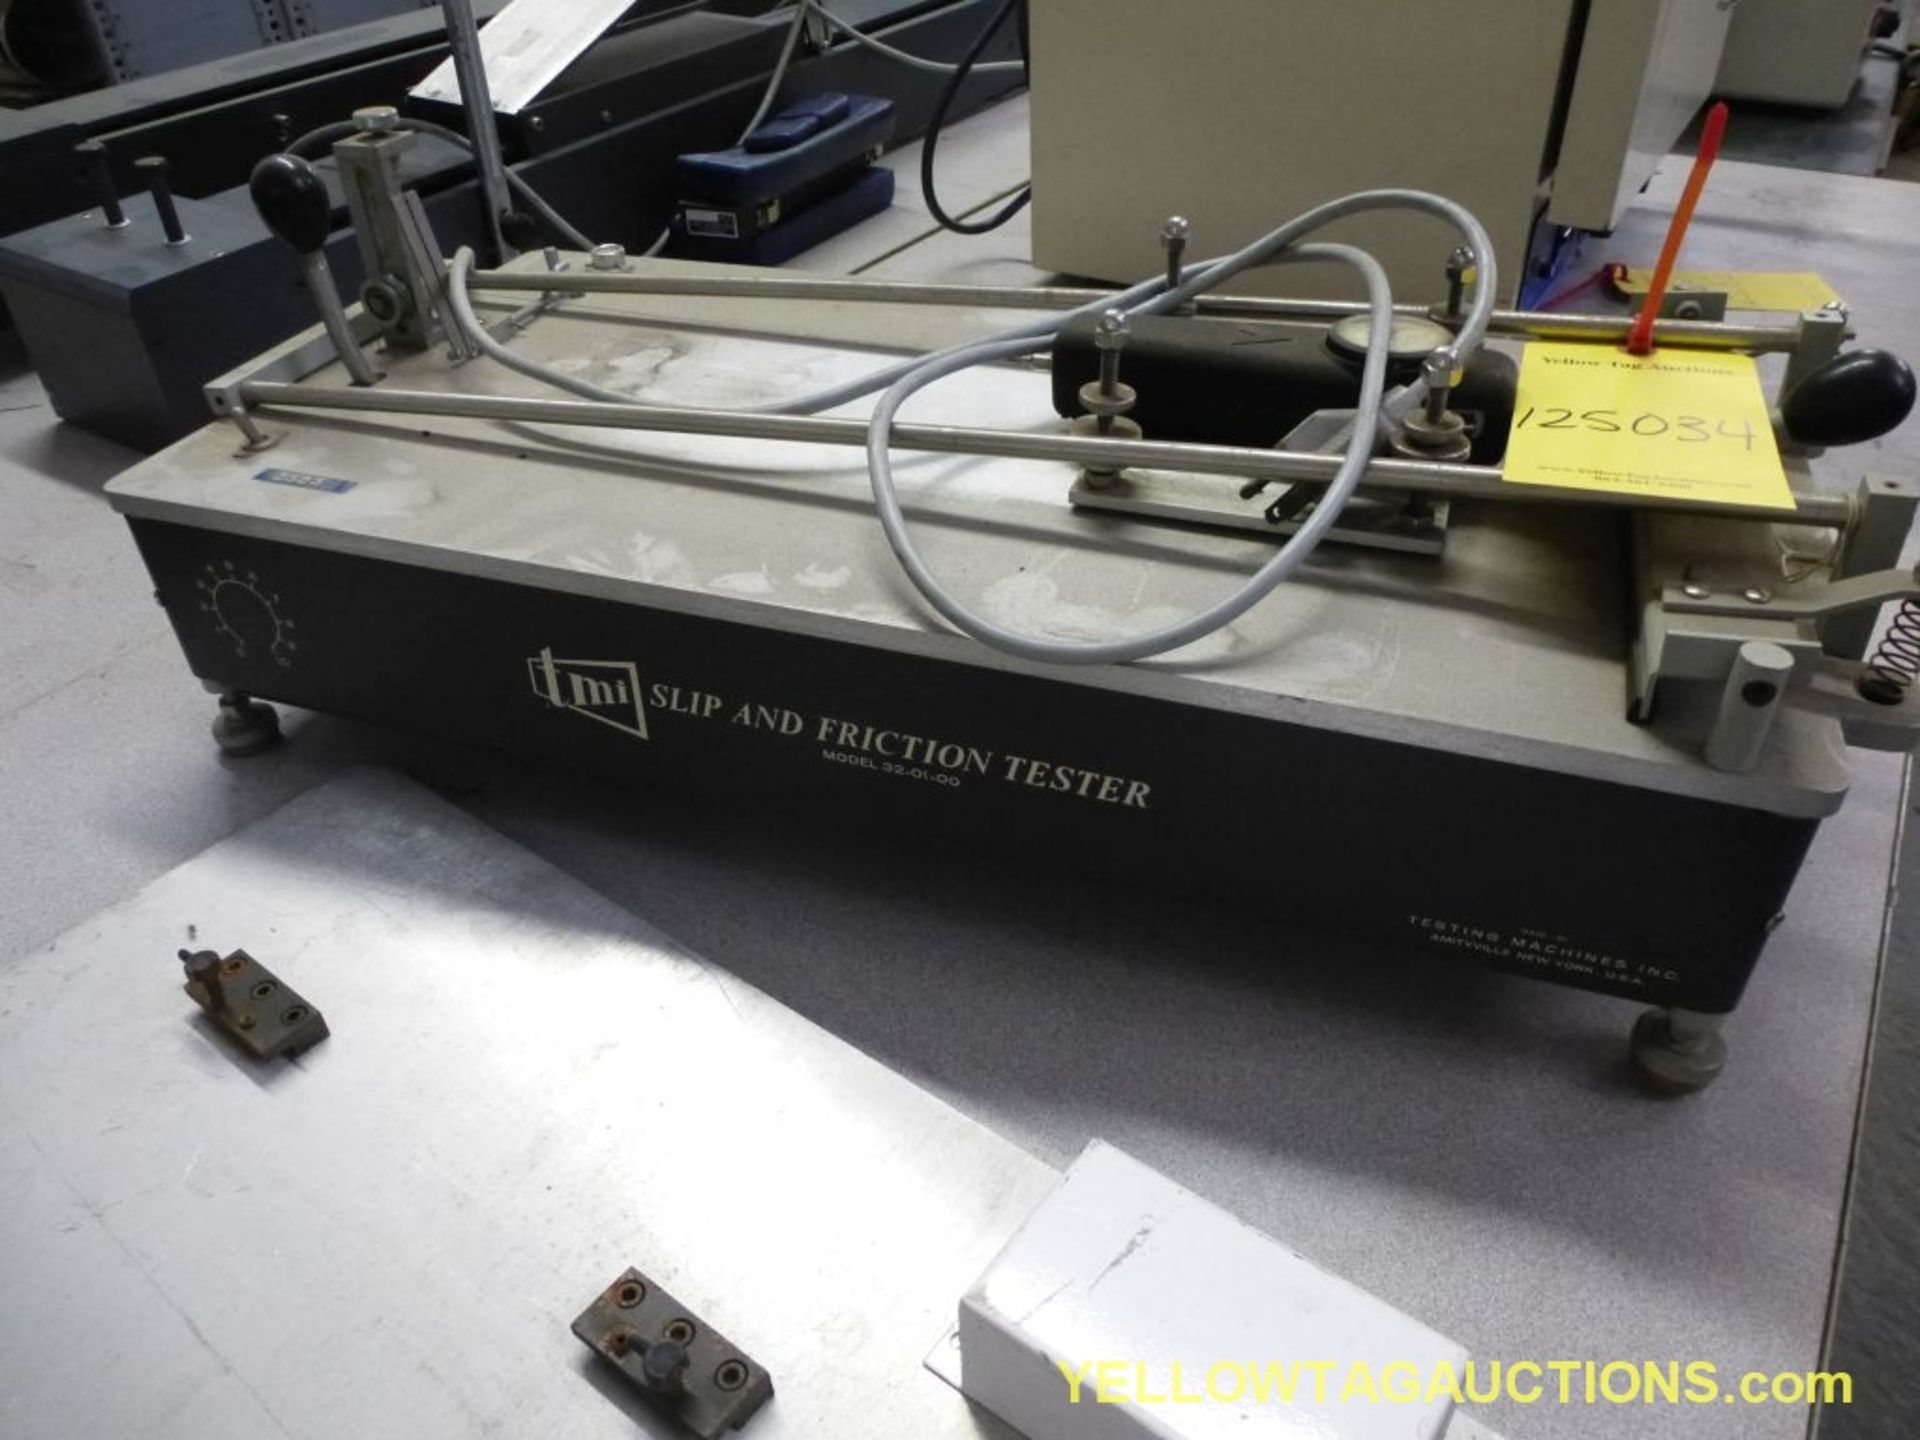 TMI Slip and Friction Tester|115VLocation: Charlotte, NC